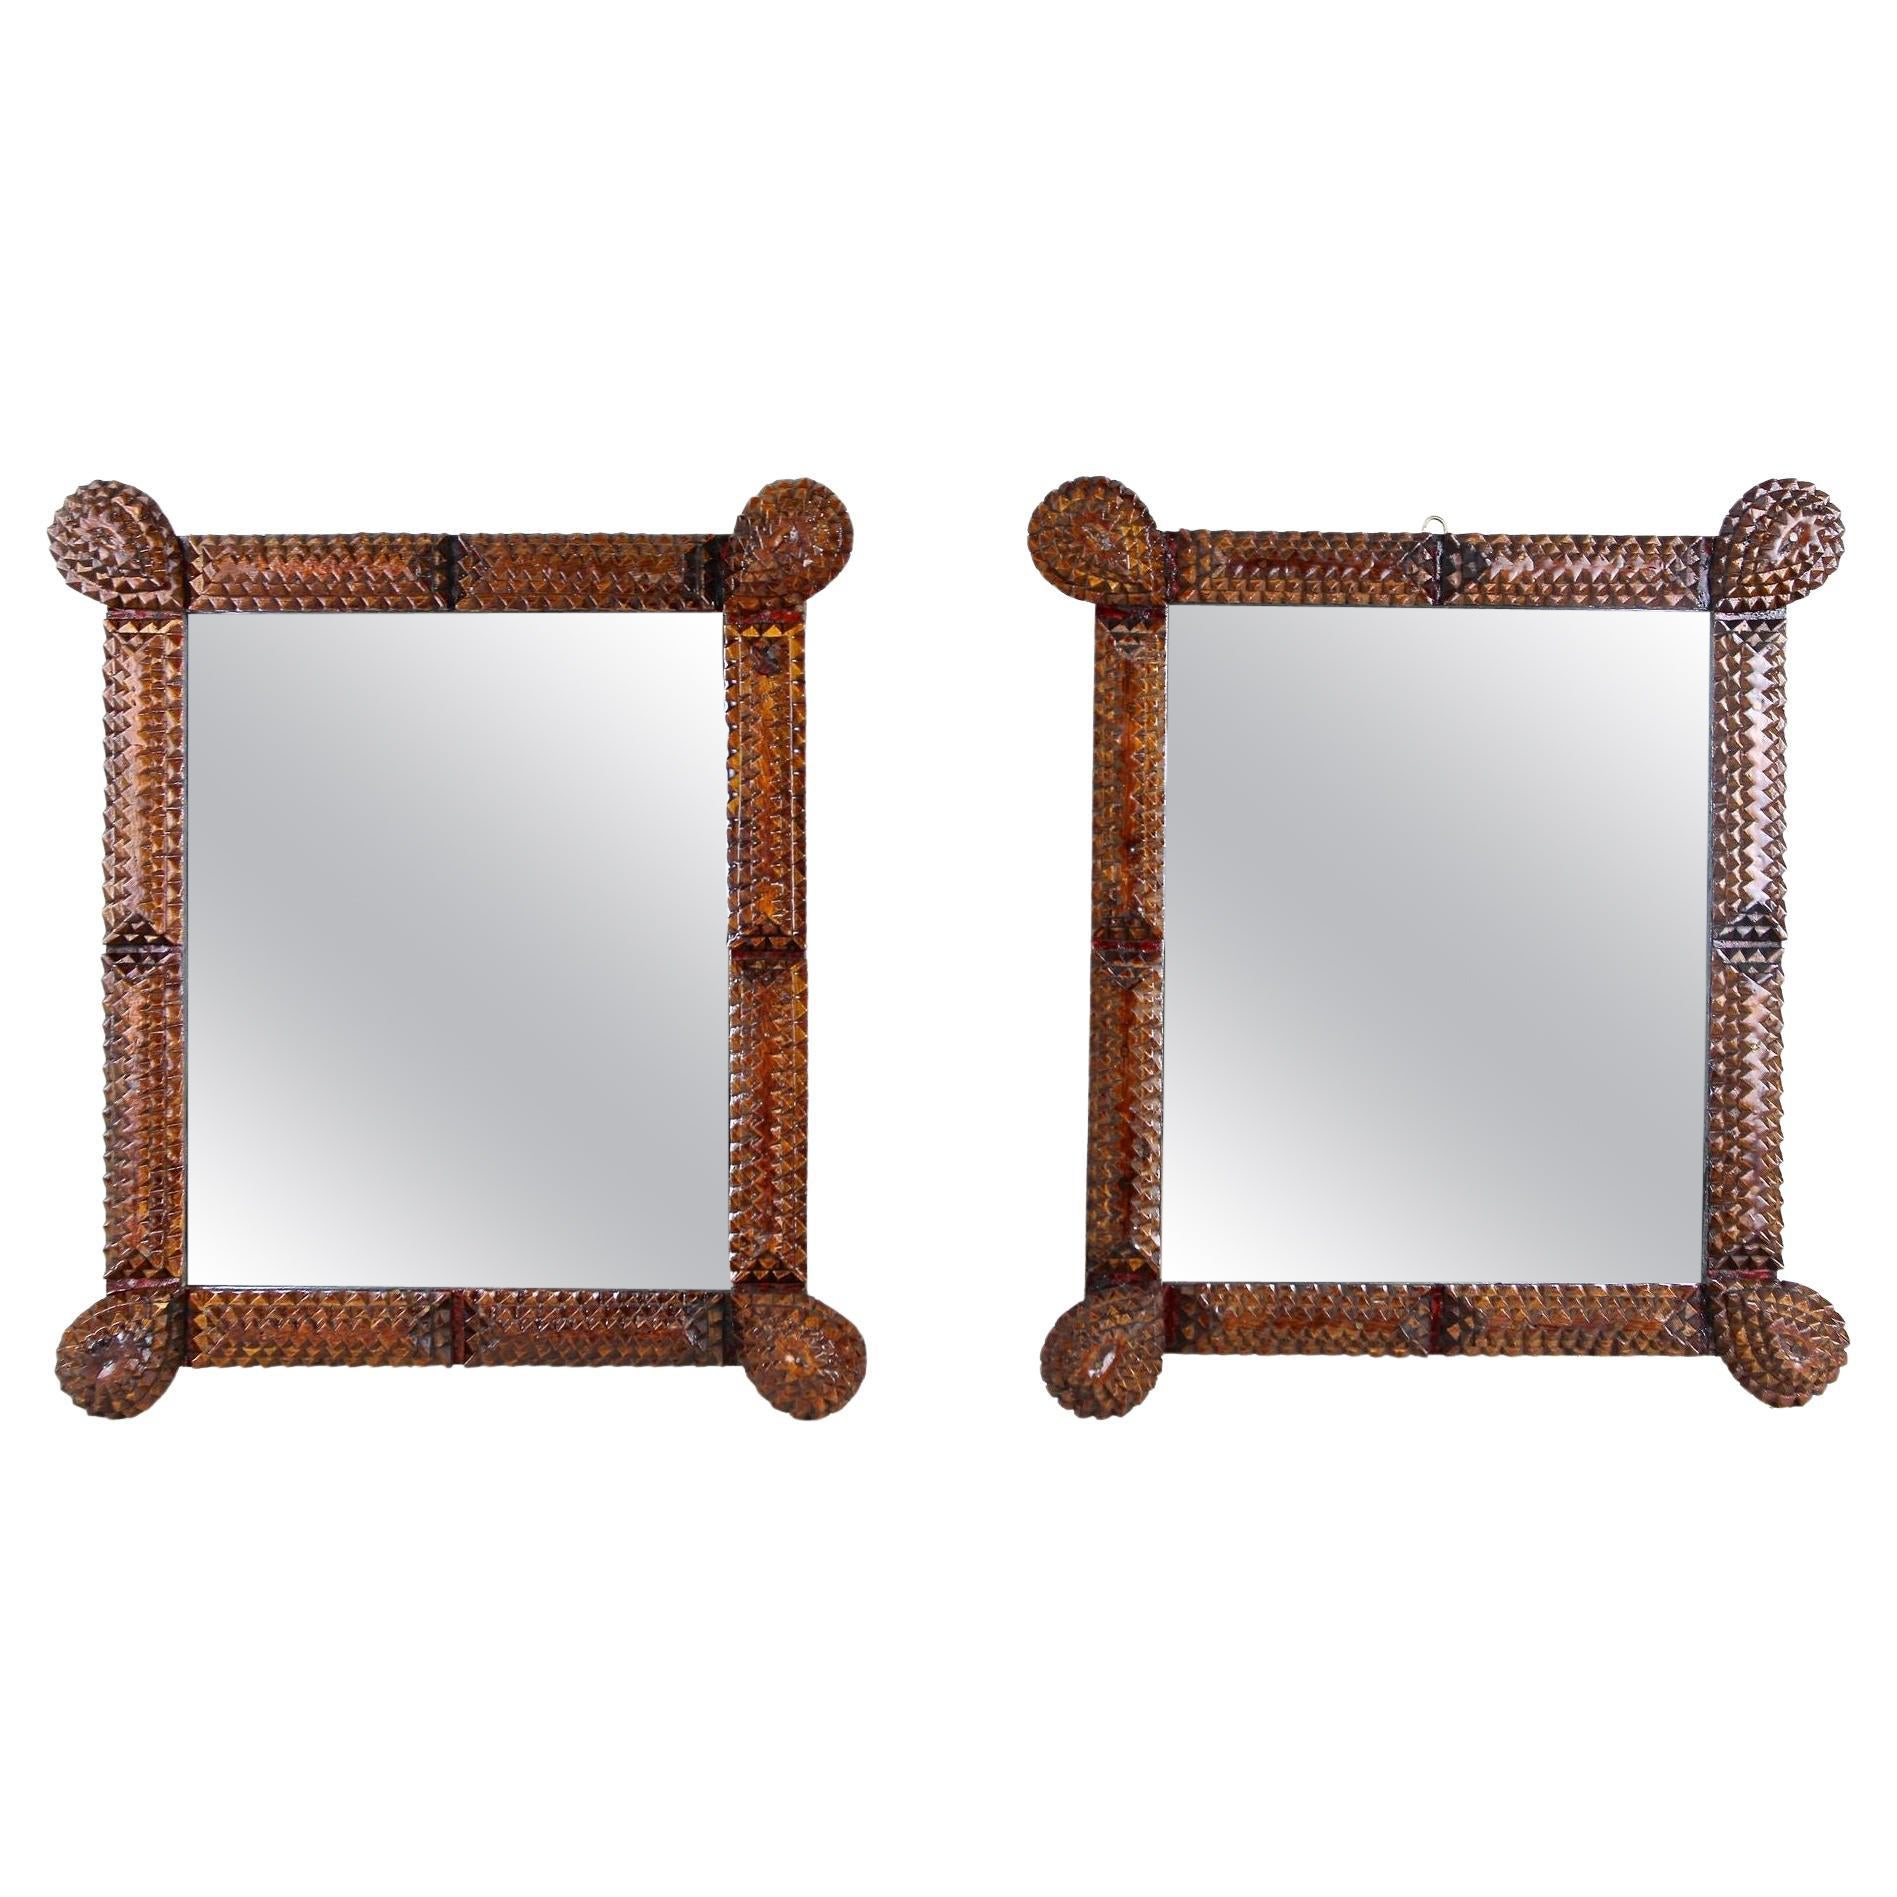 Pair of Small Tramp Art Wall Mirrors, Handcarved, Austria ca. 1870